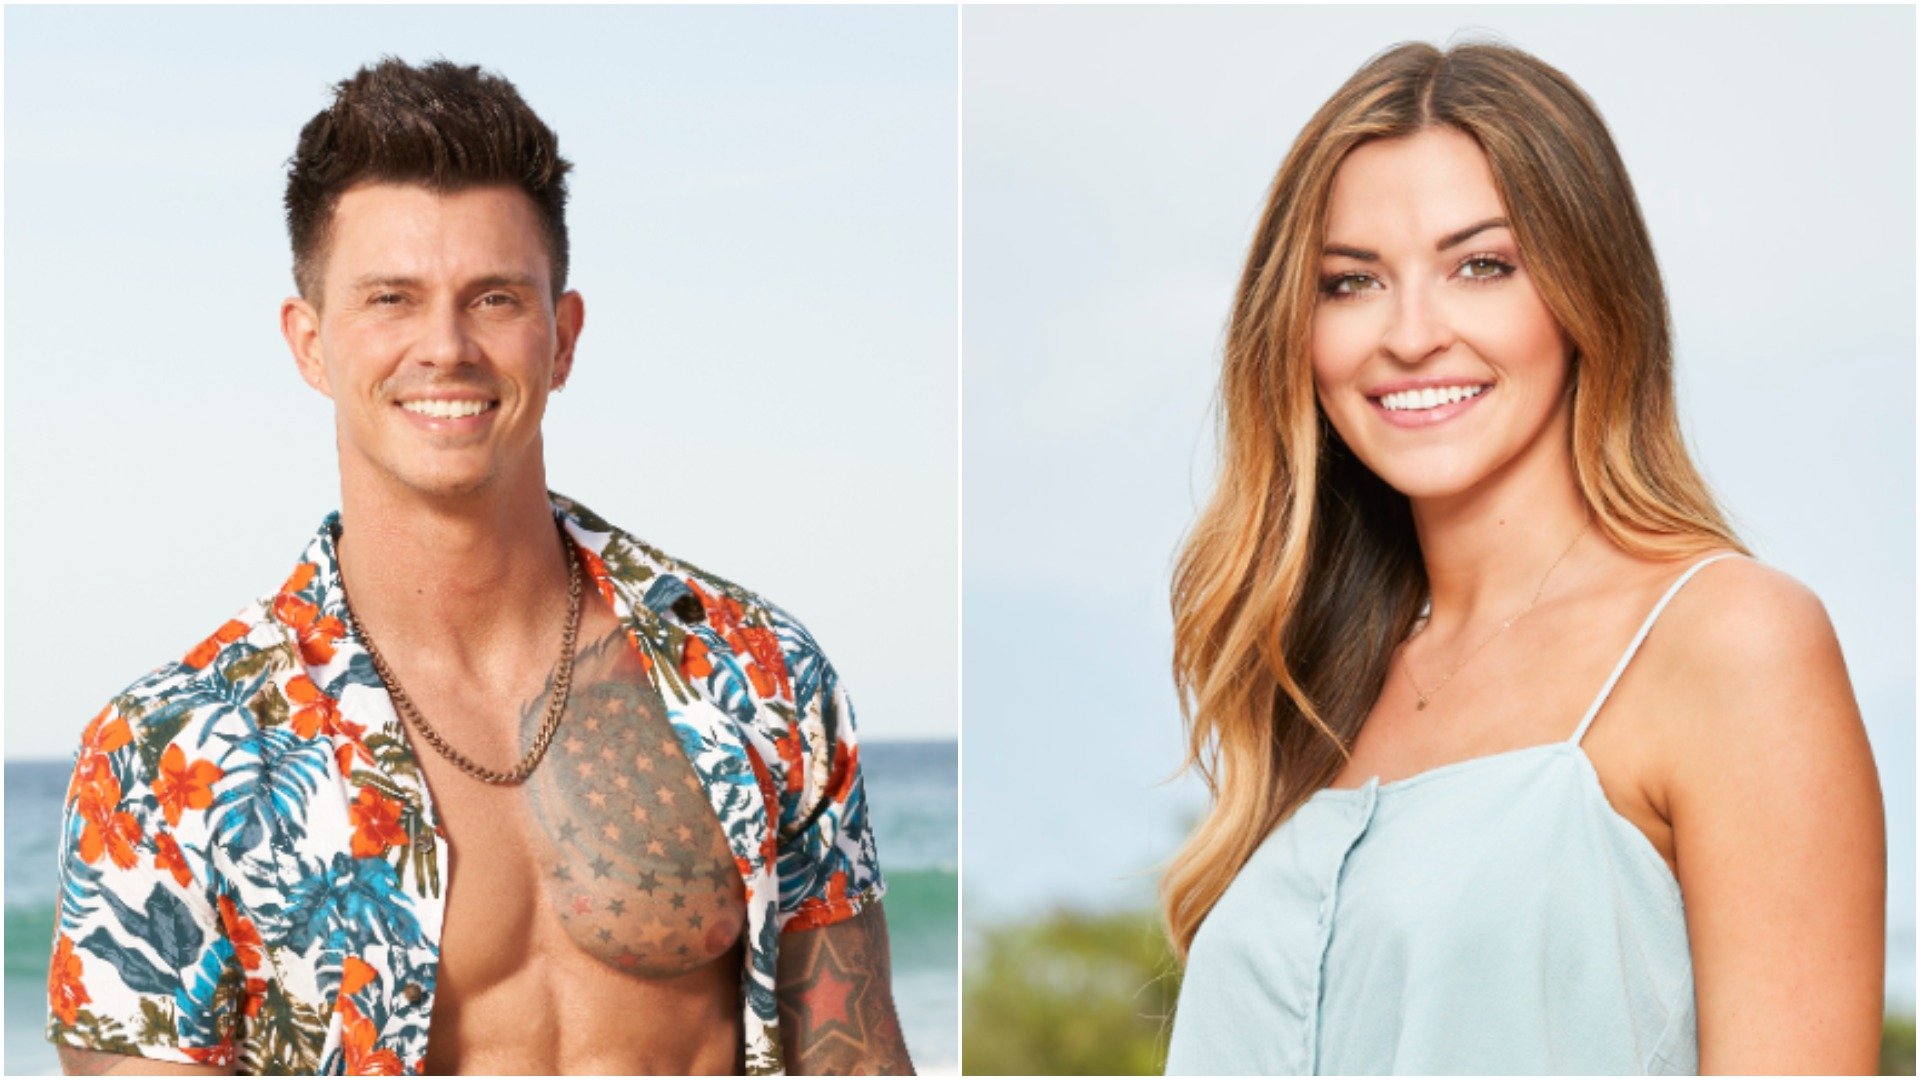 Headshot of Kenny Braasch and Tia Booth from ‘Bachelor in Paradise’ 2021